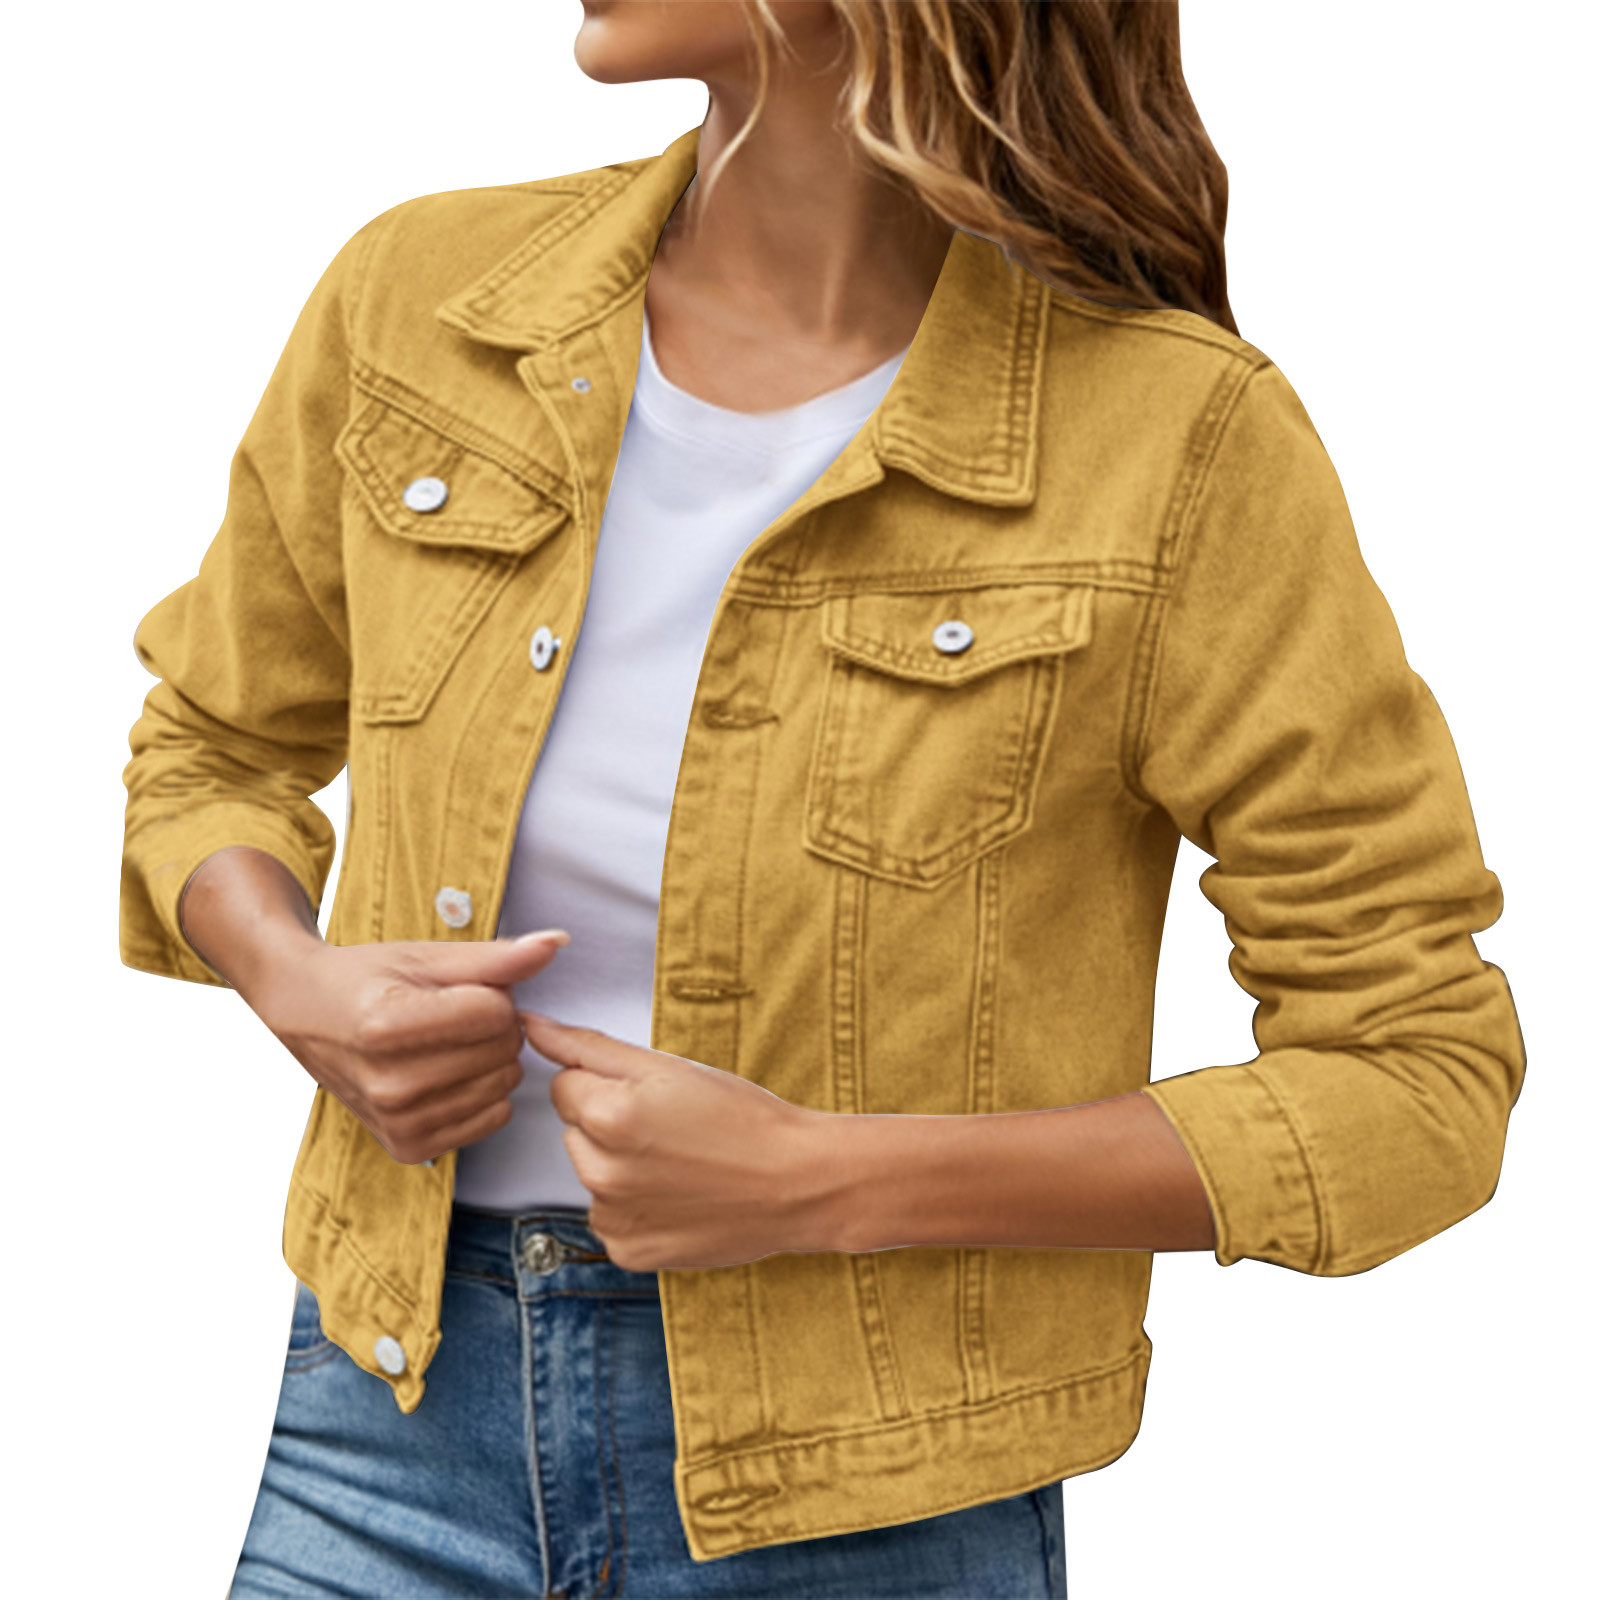 iOPQO womens sweaters Women's Basic Solid Color Button Down Denim Cotton Jacket With Pockets Denim Jacket Coat Women's Denim Jackets Yellow XXL - image 1 of 8